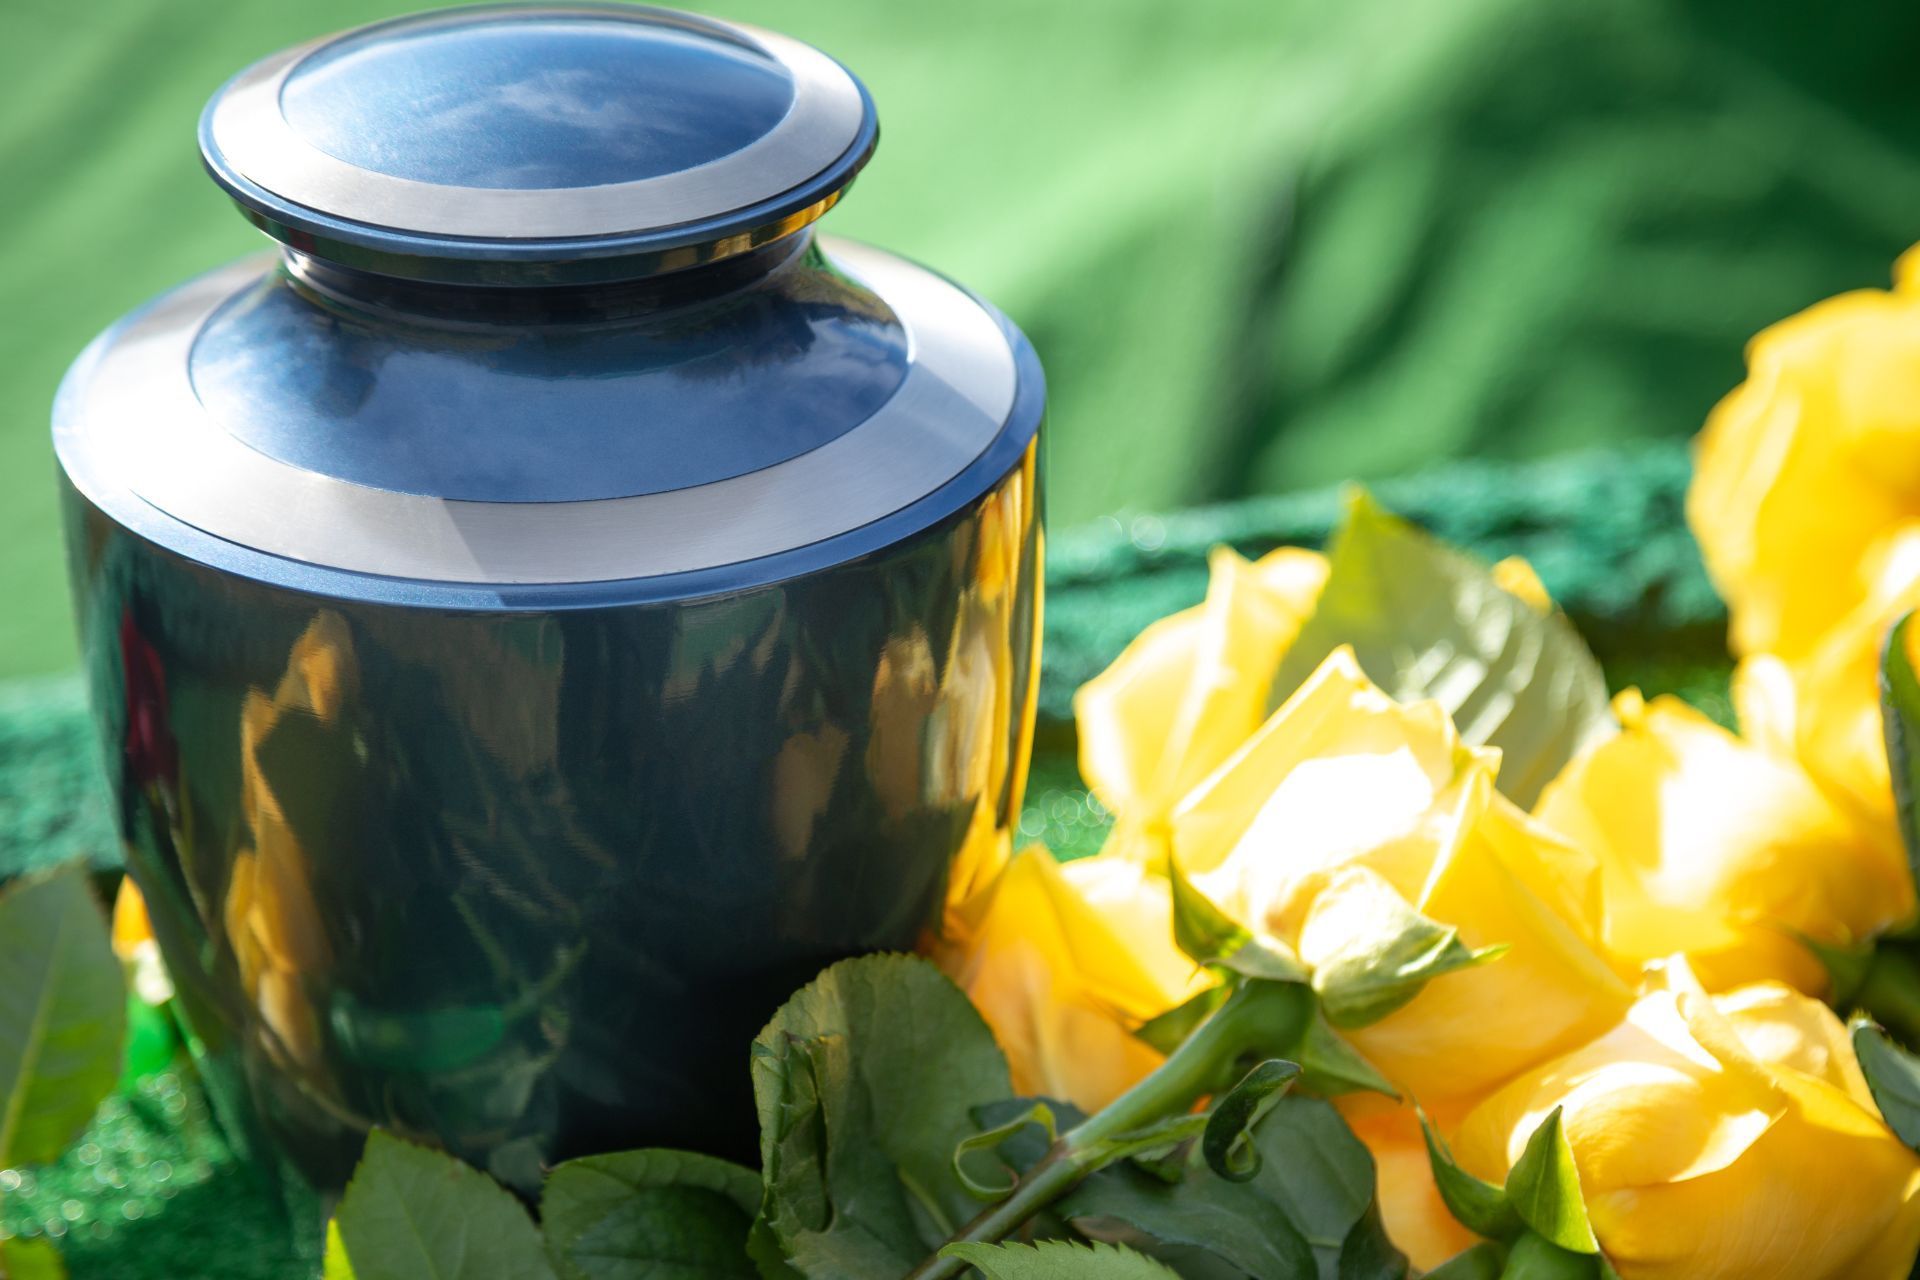 a black urn sitting next to yellow roses on a green table .